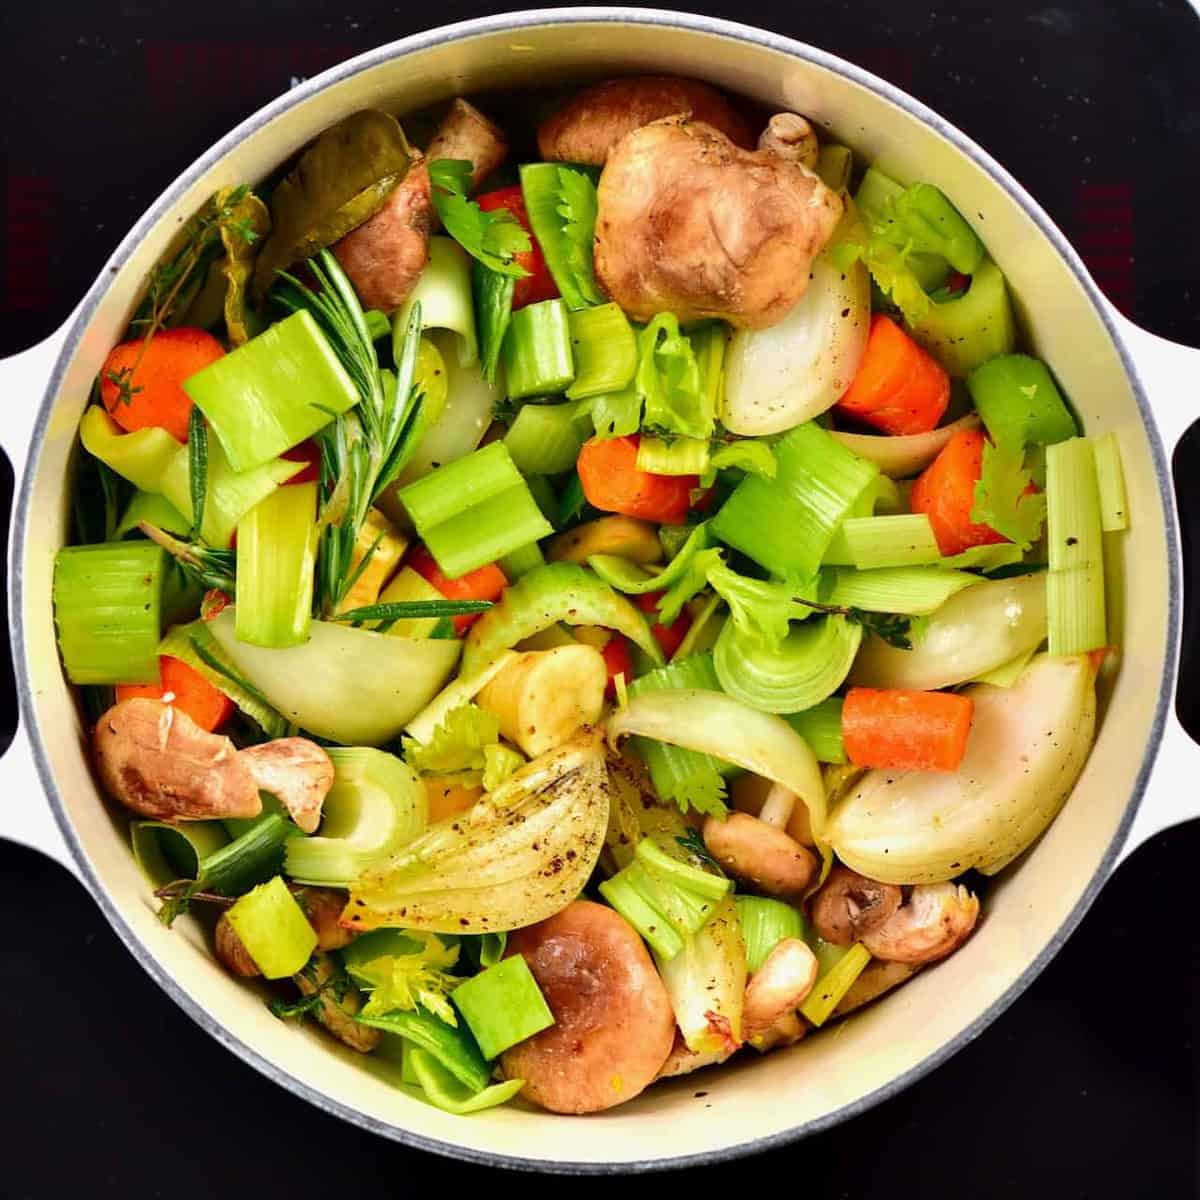 the ingredients for a delicious homemade vegetable stock including carrots, parsnips, mushrooms, celery, onion, garlic, ginger and a variety of herbs